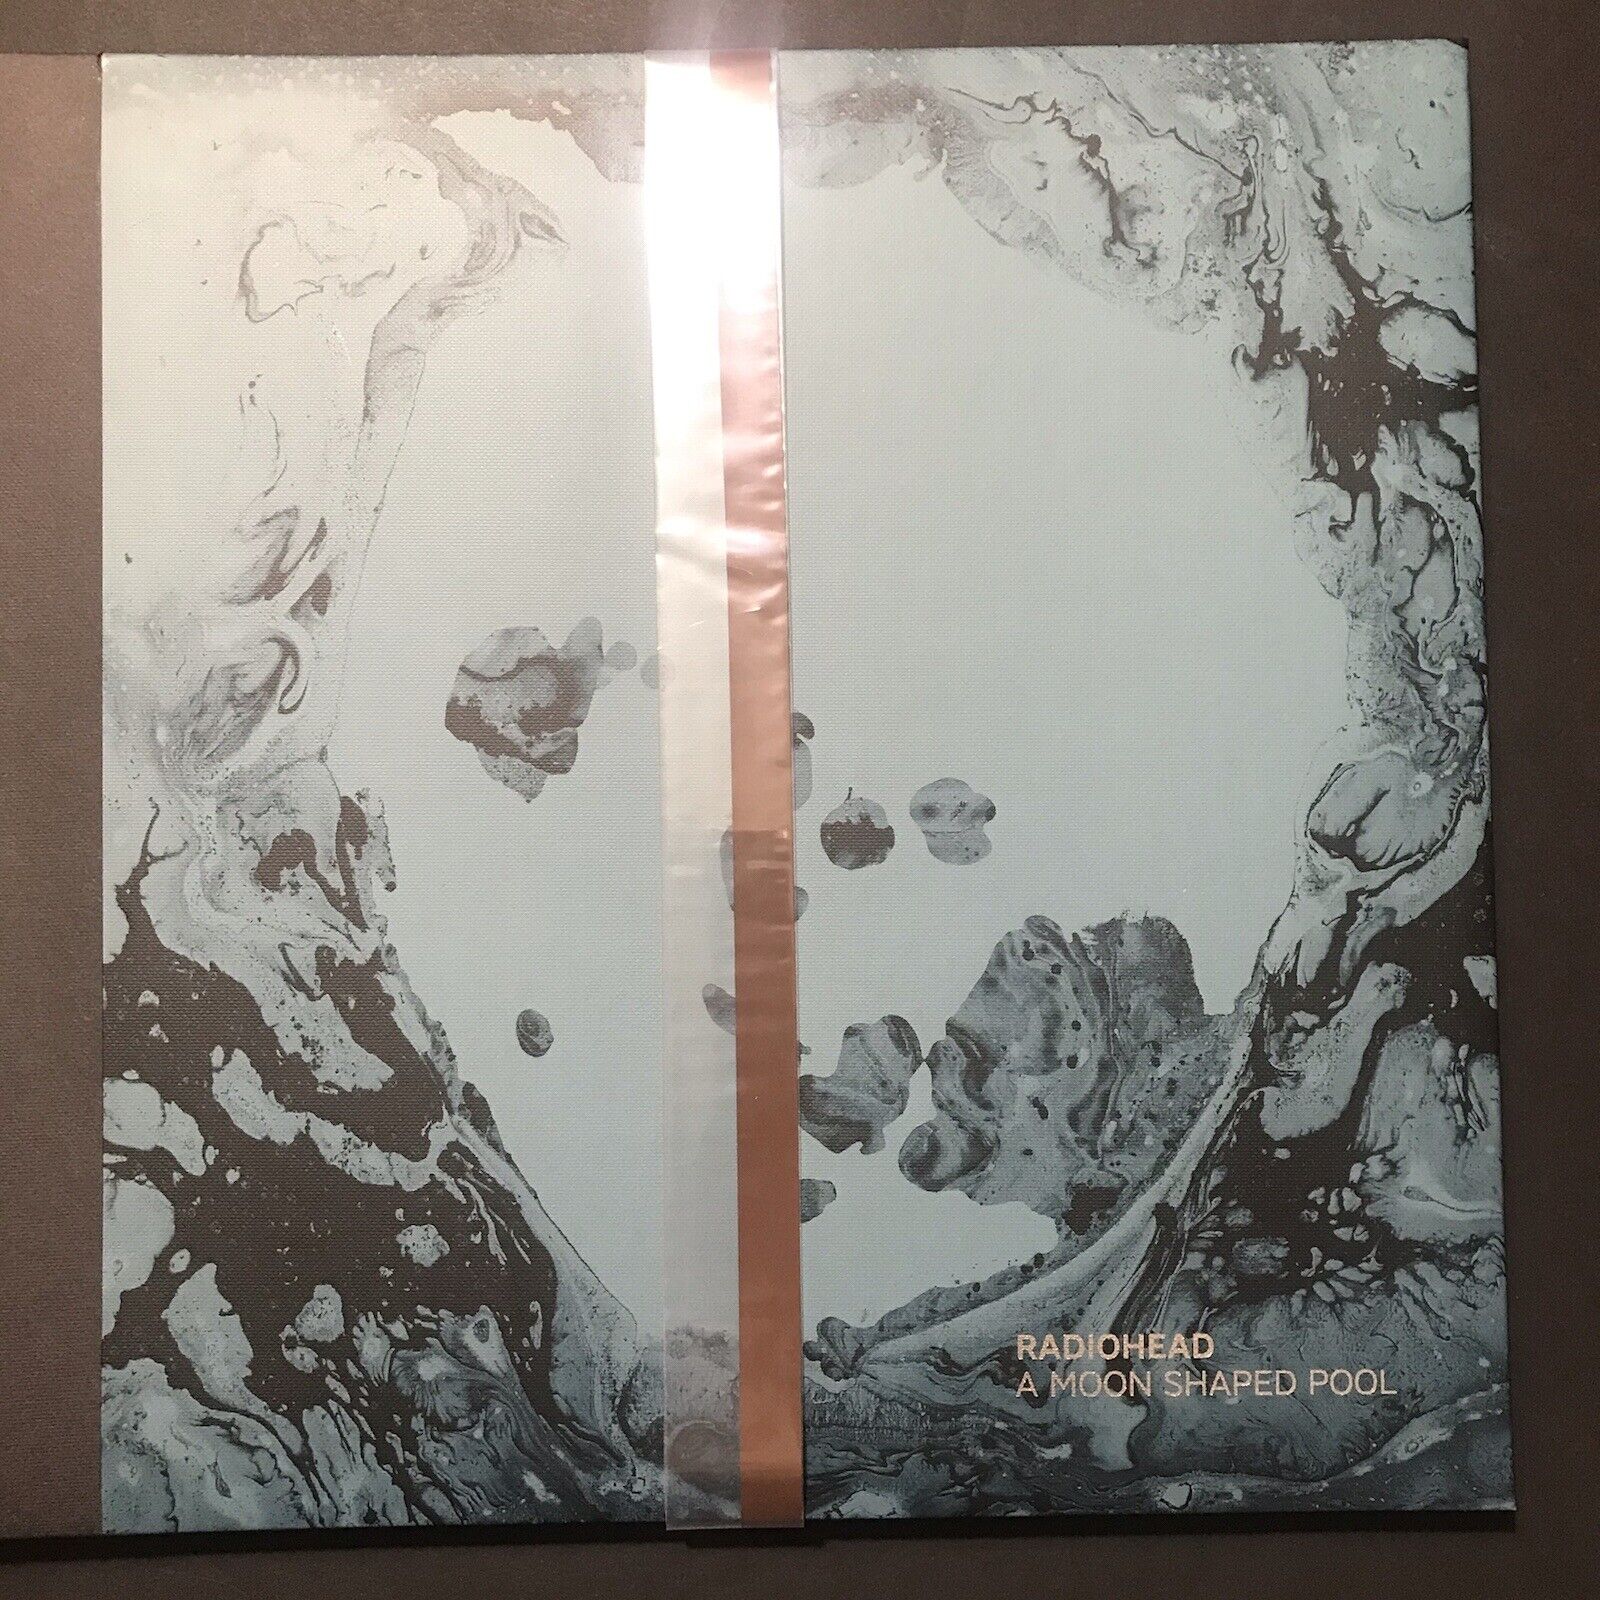 Radiohead A Moon Shaped Pool Special Deluxe Edition 2 LP, 2 CD Collector’s Item